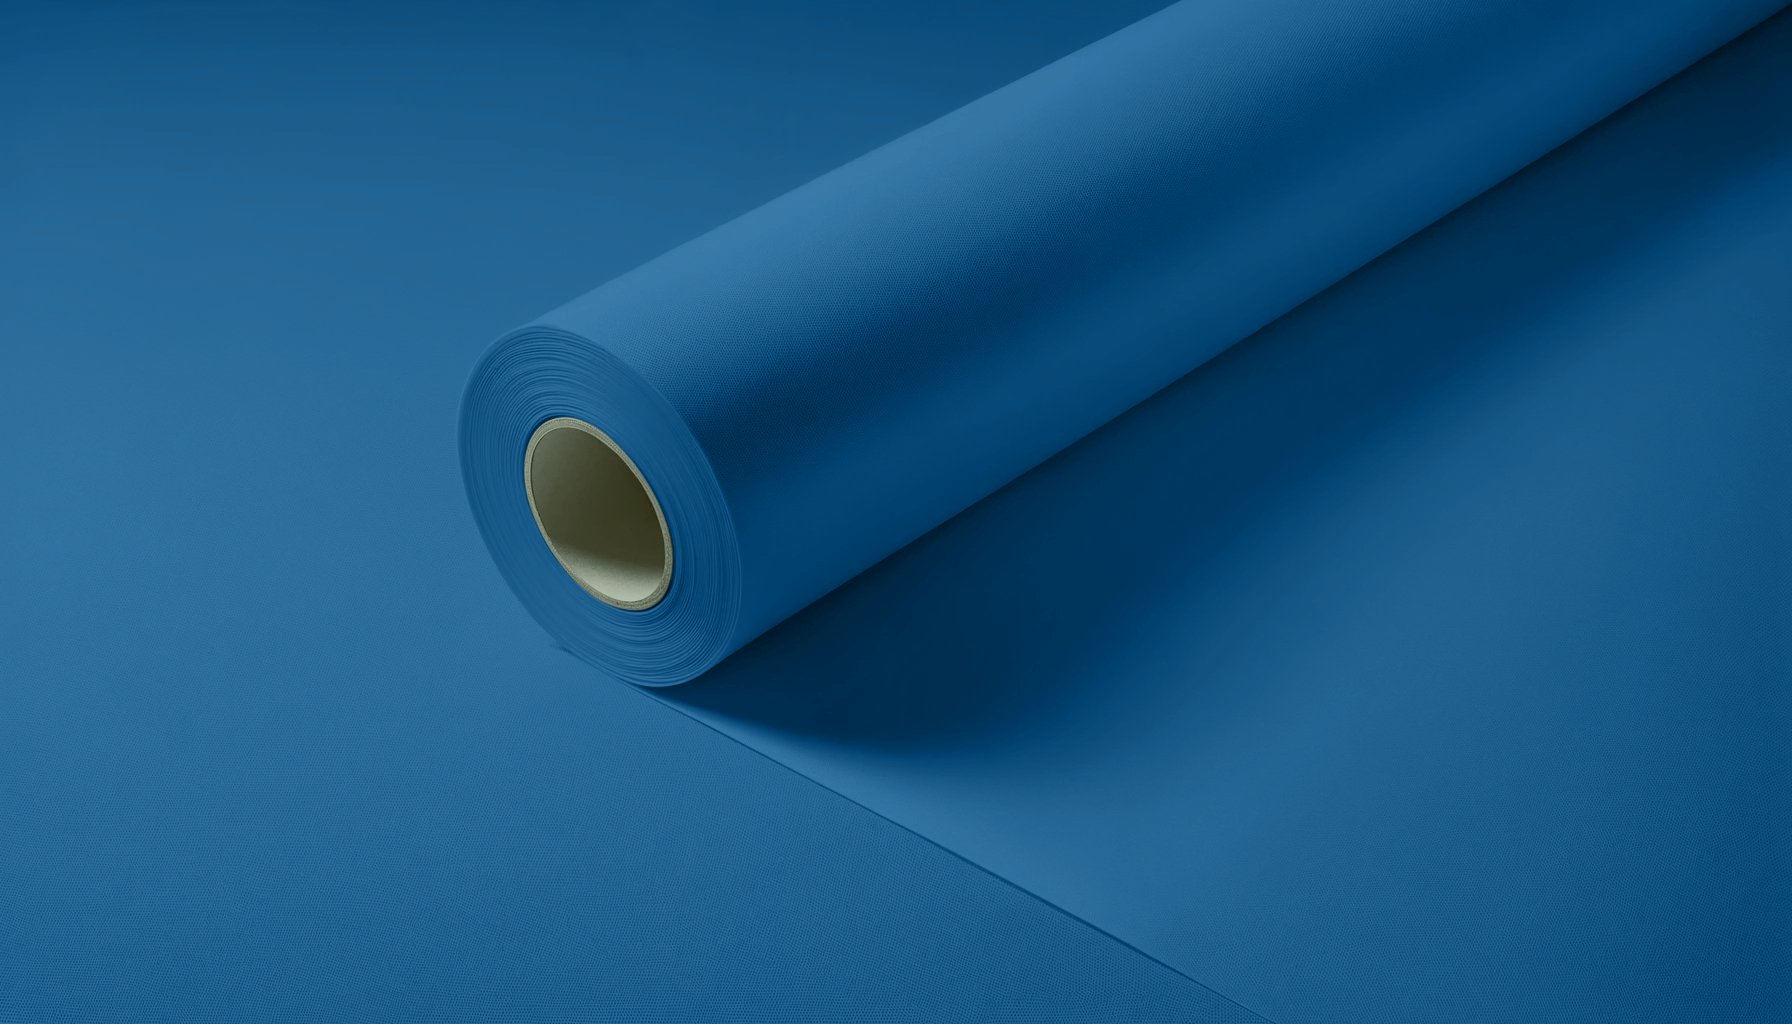 Peel & Stick Removable Re-usable Paint - Color RAL 5017 Traffic Blue - offRAL™ - RALRAW LLC, USA